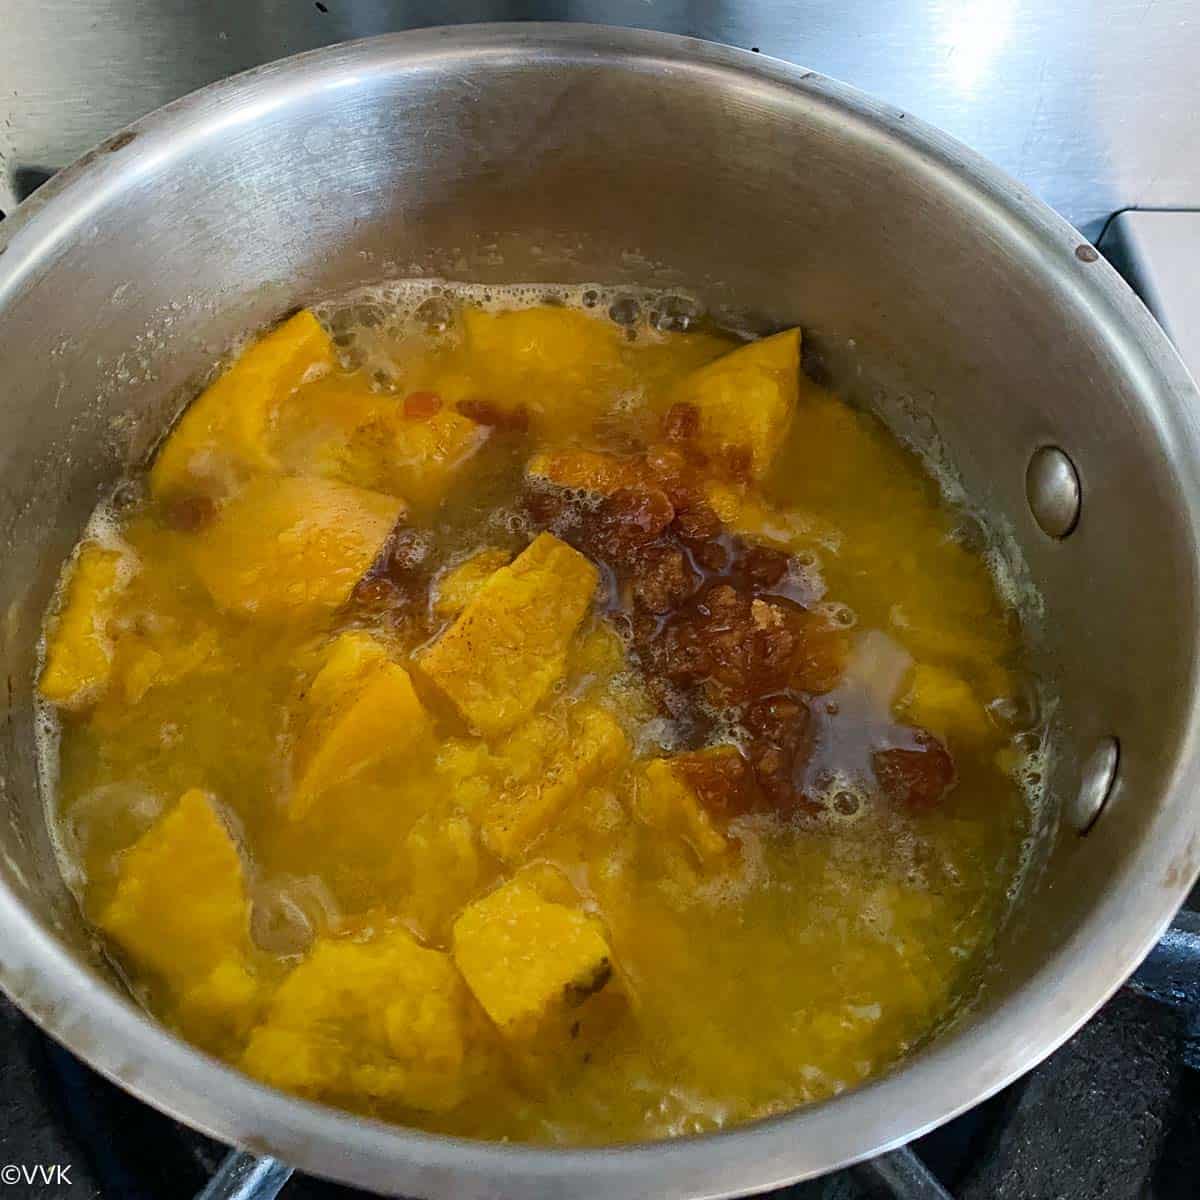 softened mangoes with jaggery